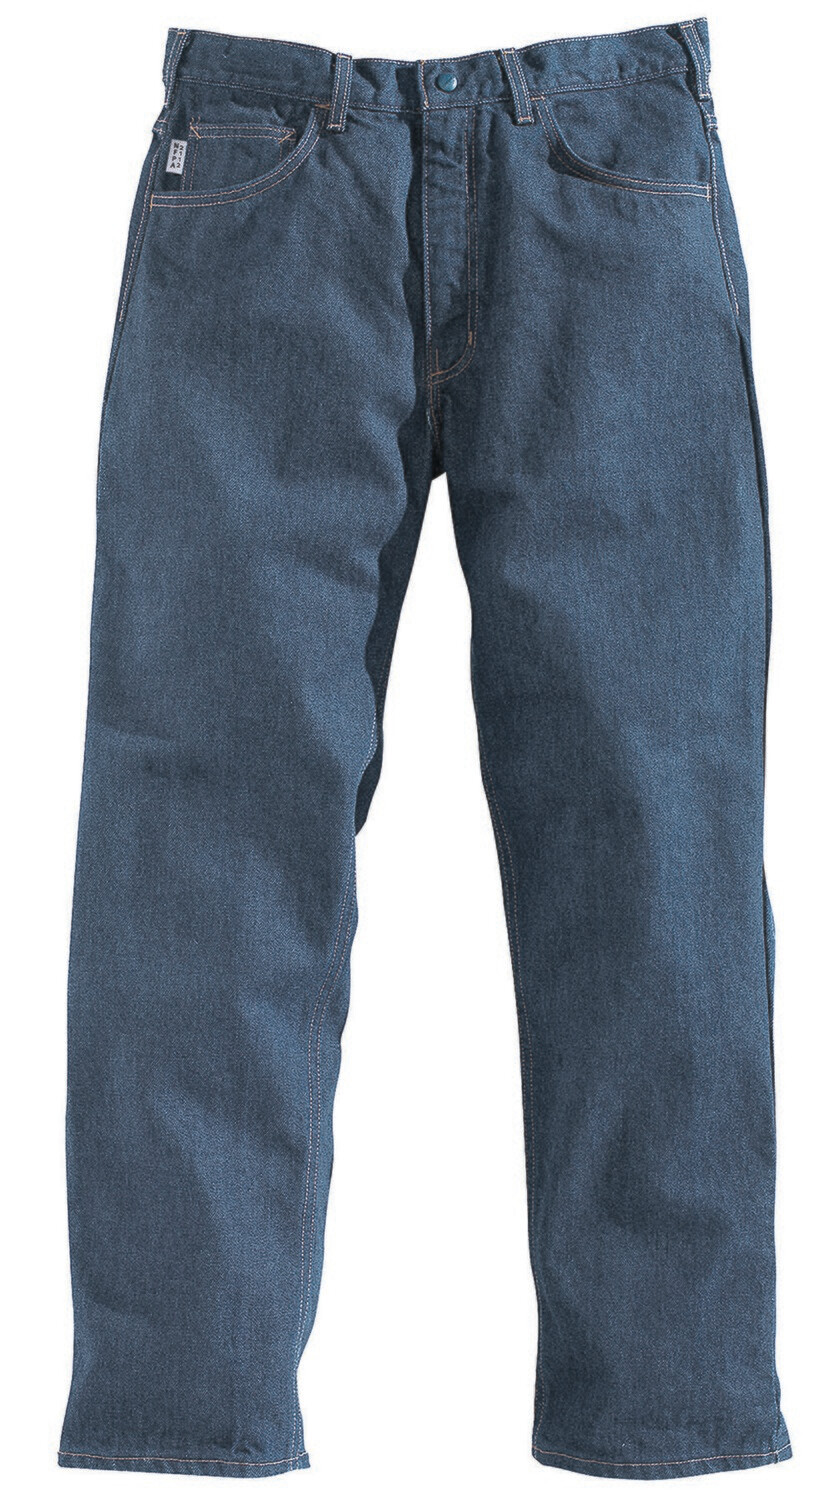 Flame Resistant Relaxed Fit Utility Denim Jean By Carhartt FRB004MDS